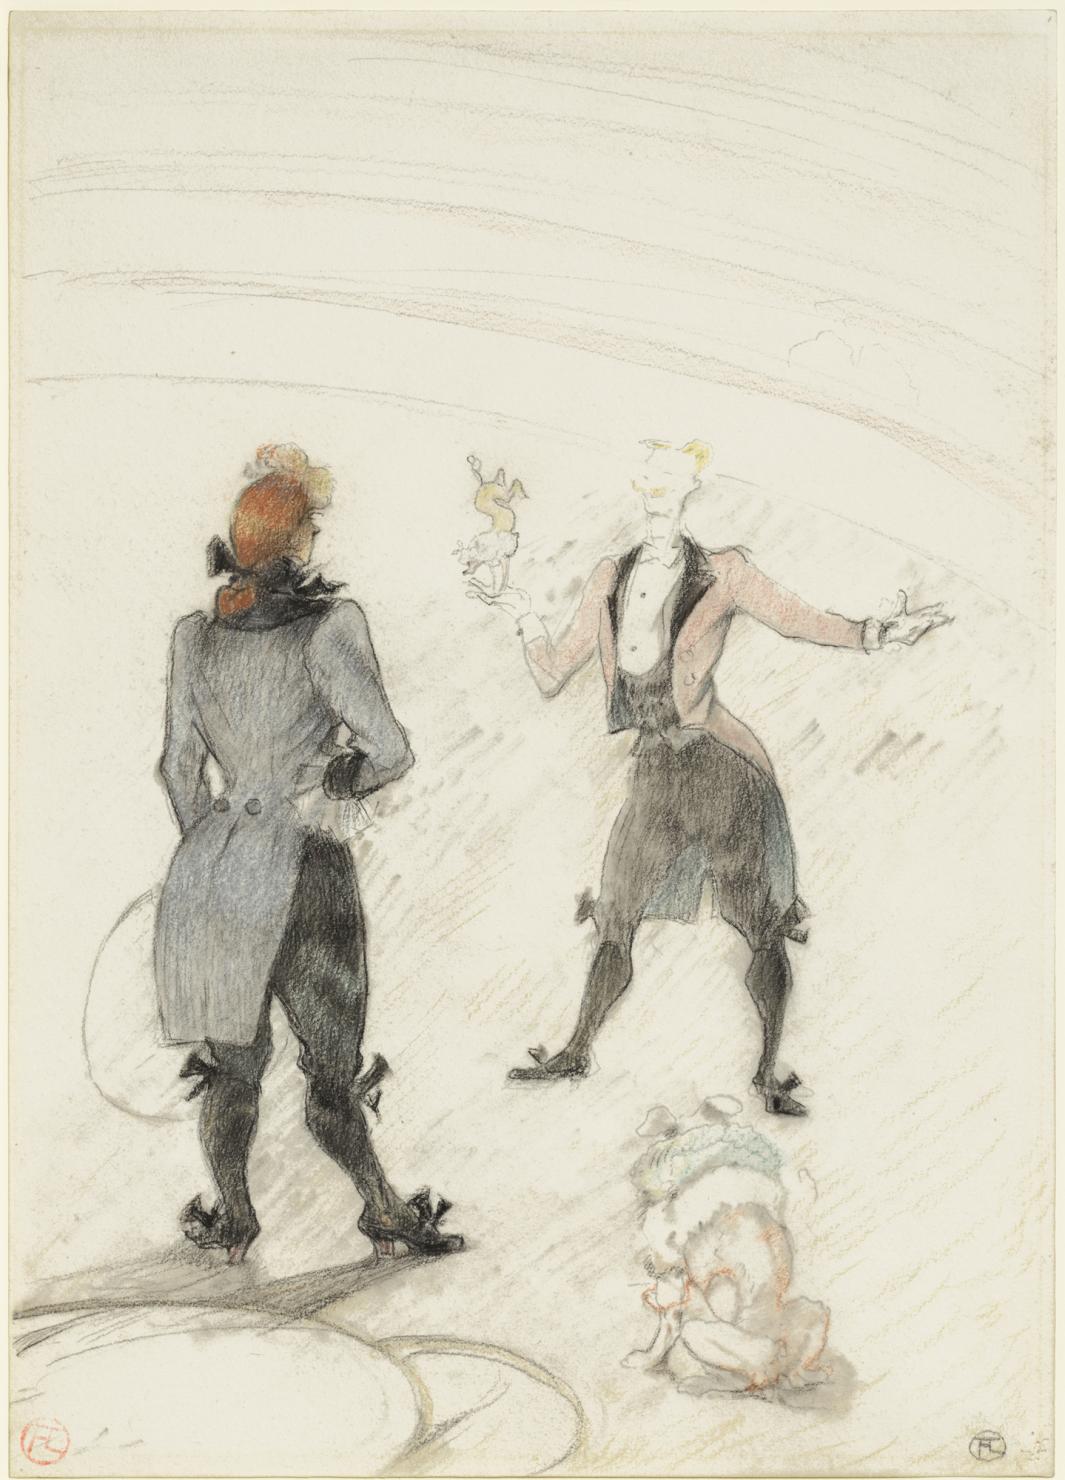 Chalk drawing of two men and dogs in a circus ring